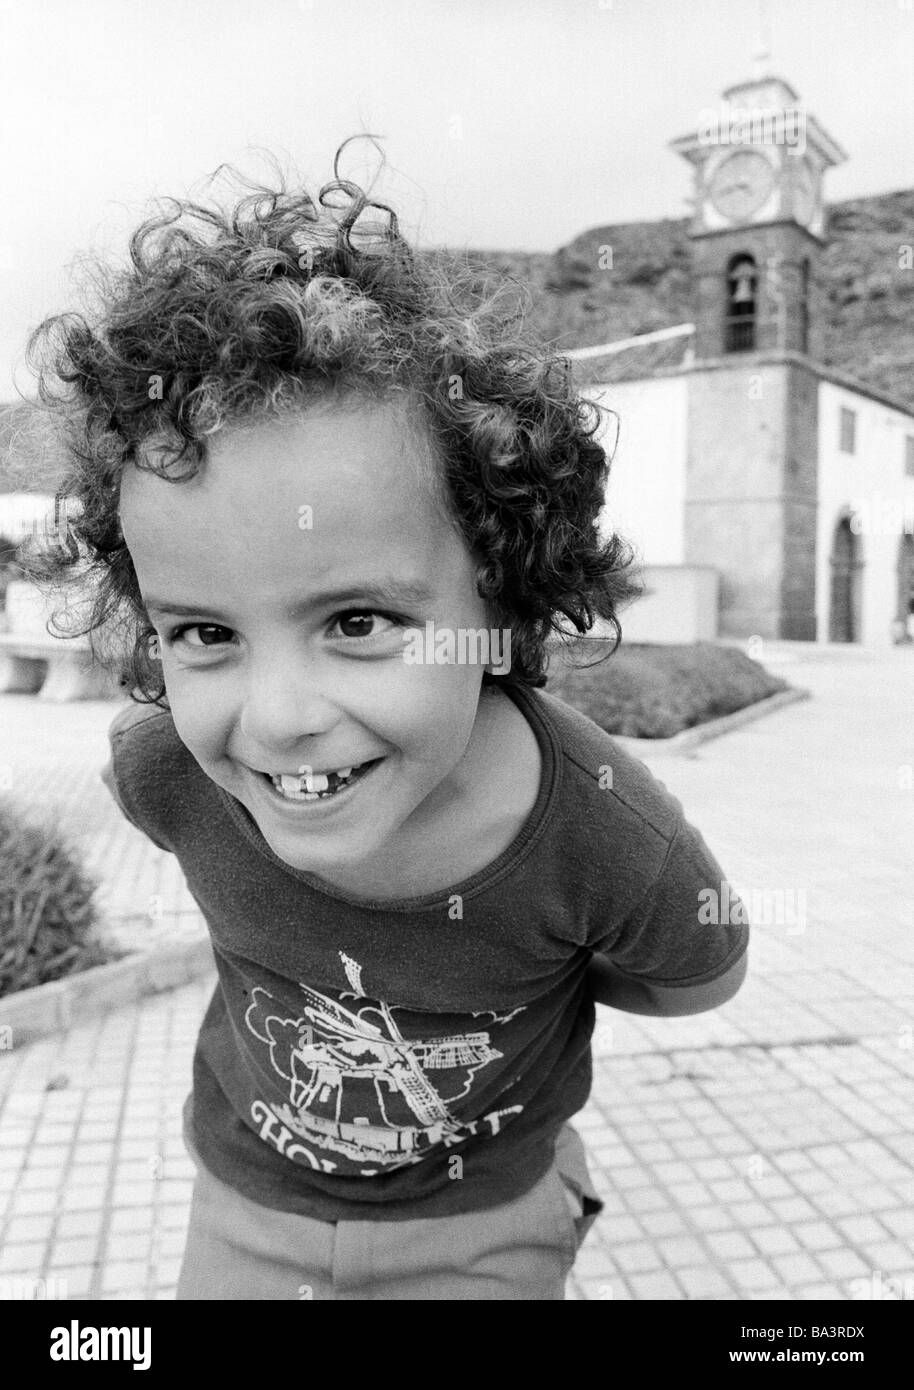 Eighties, black and white photo, people, children, little boy laughs in the camera, portrait, fishey lens, aged 6 to 10 years, Spain, Canary Islands, Canaries, Tenerife, San Juan Stock Photo